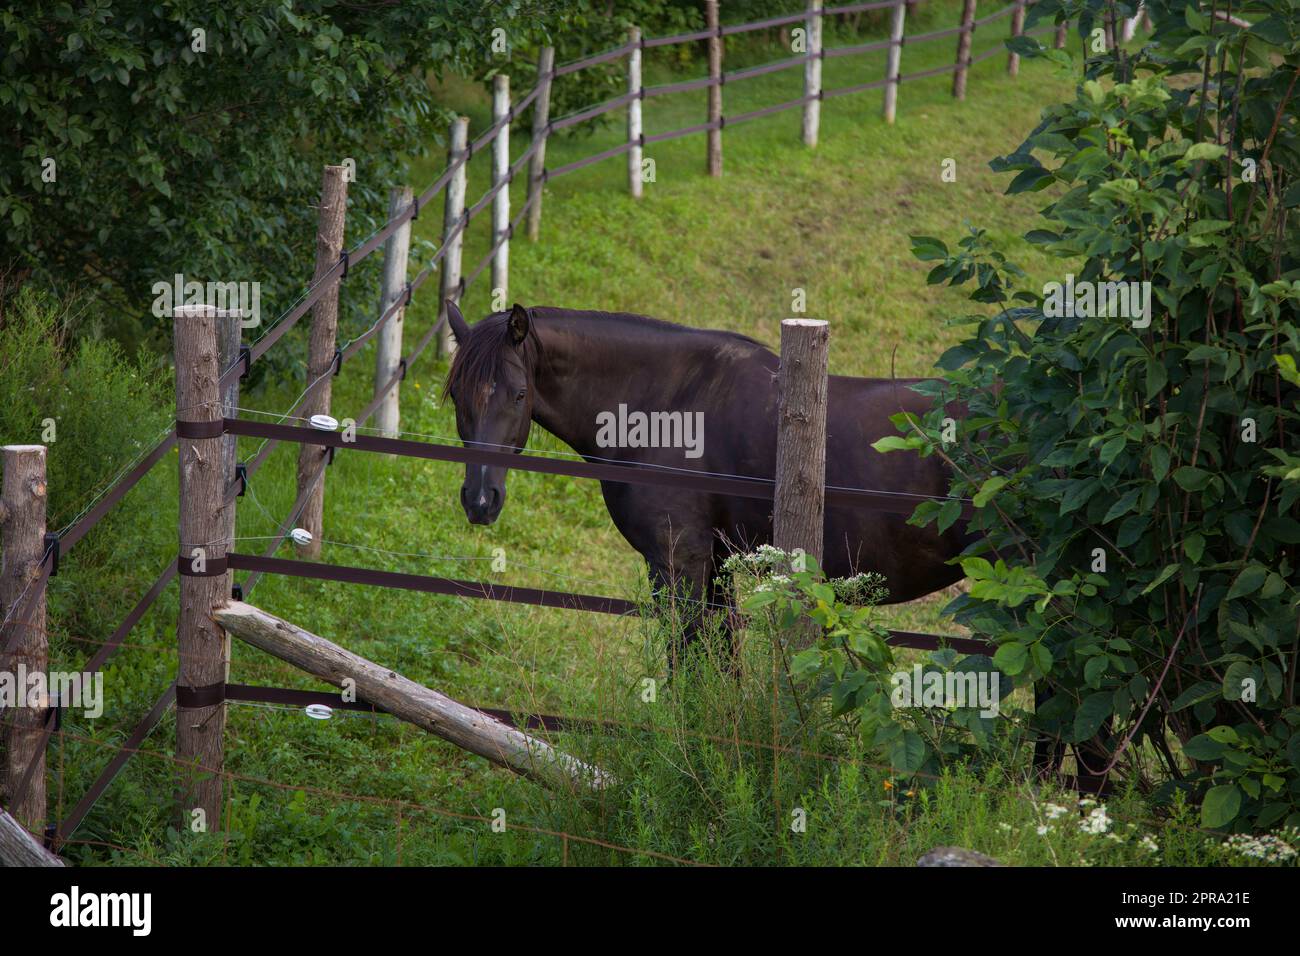 brown horse in enclosure country farm animal wooden fence green field Stock Photo